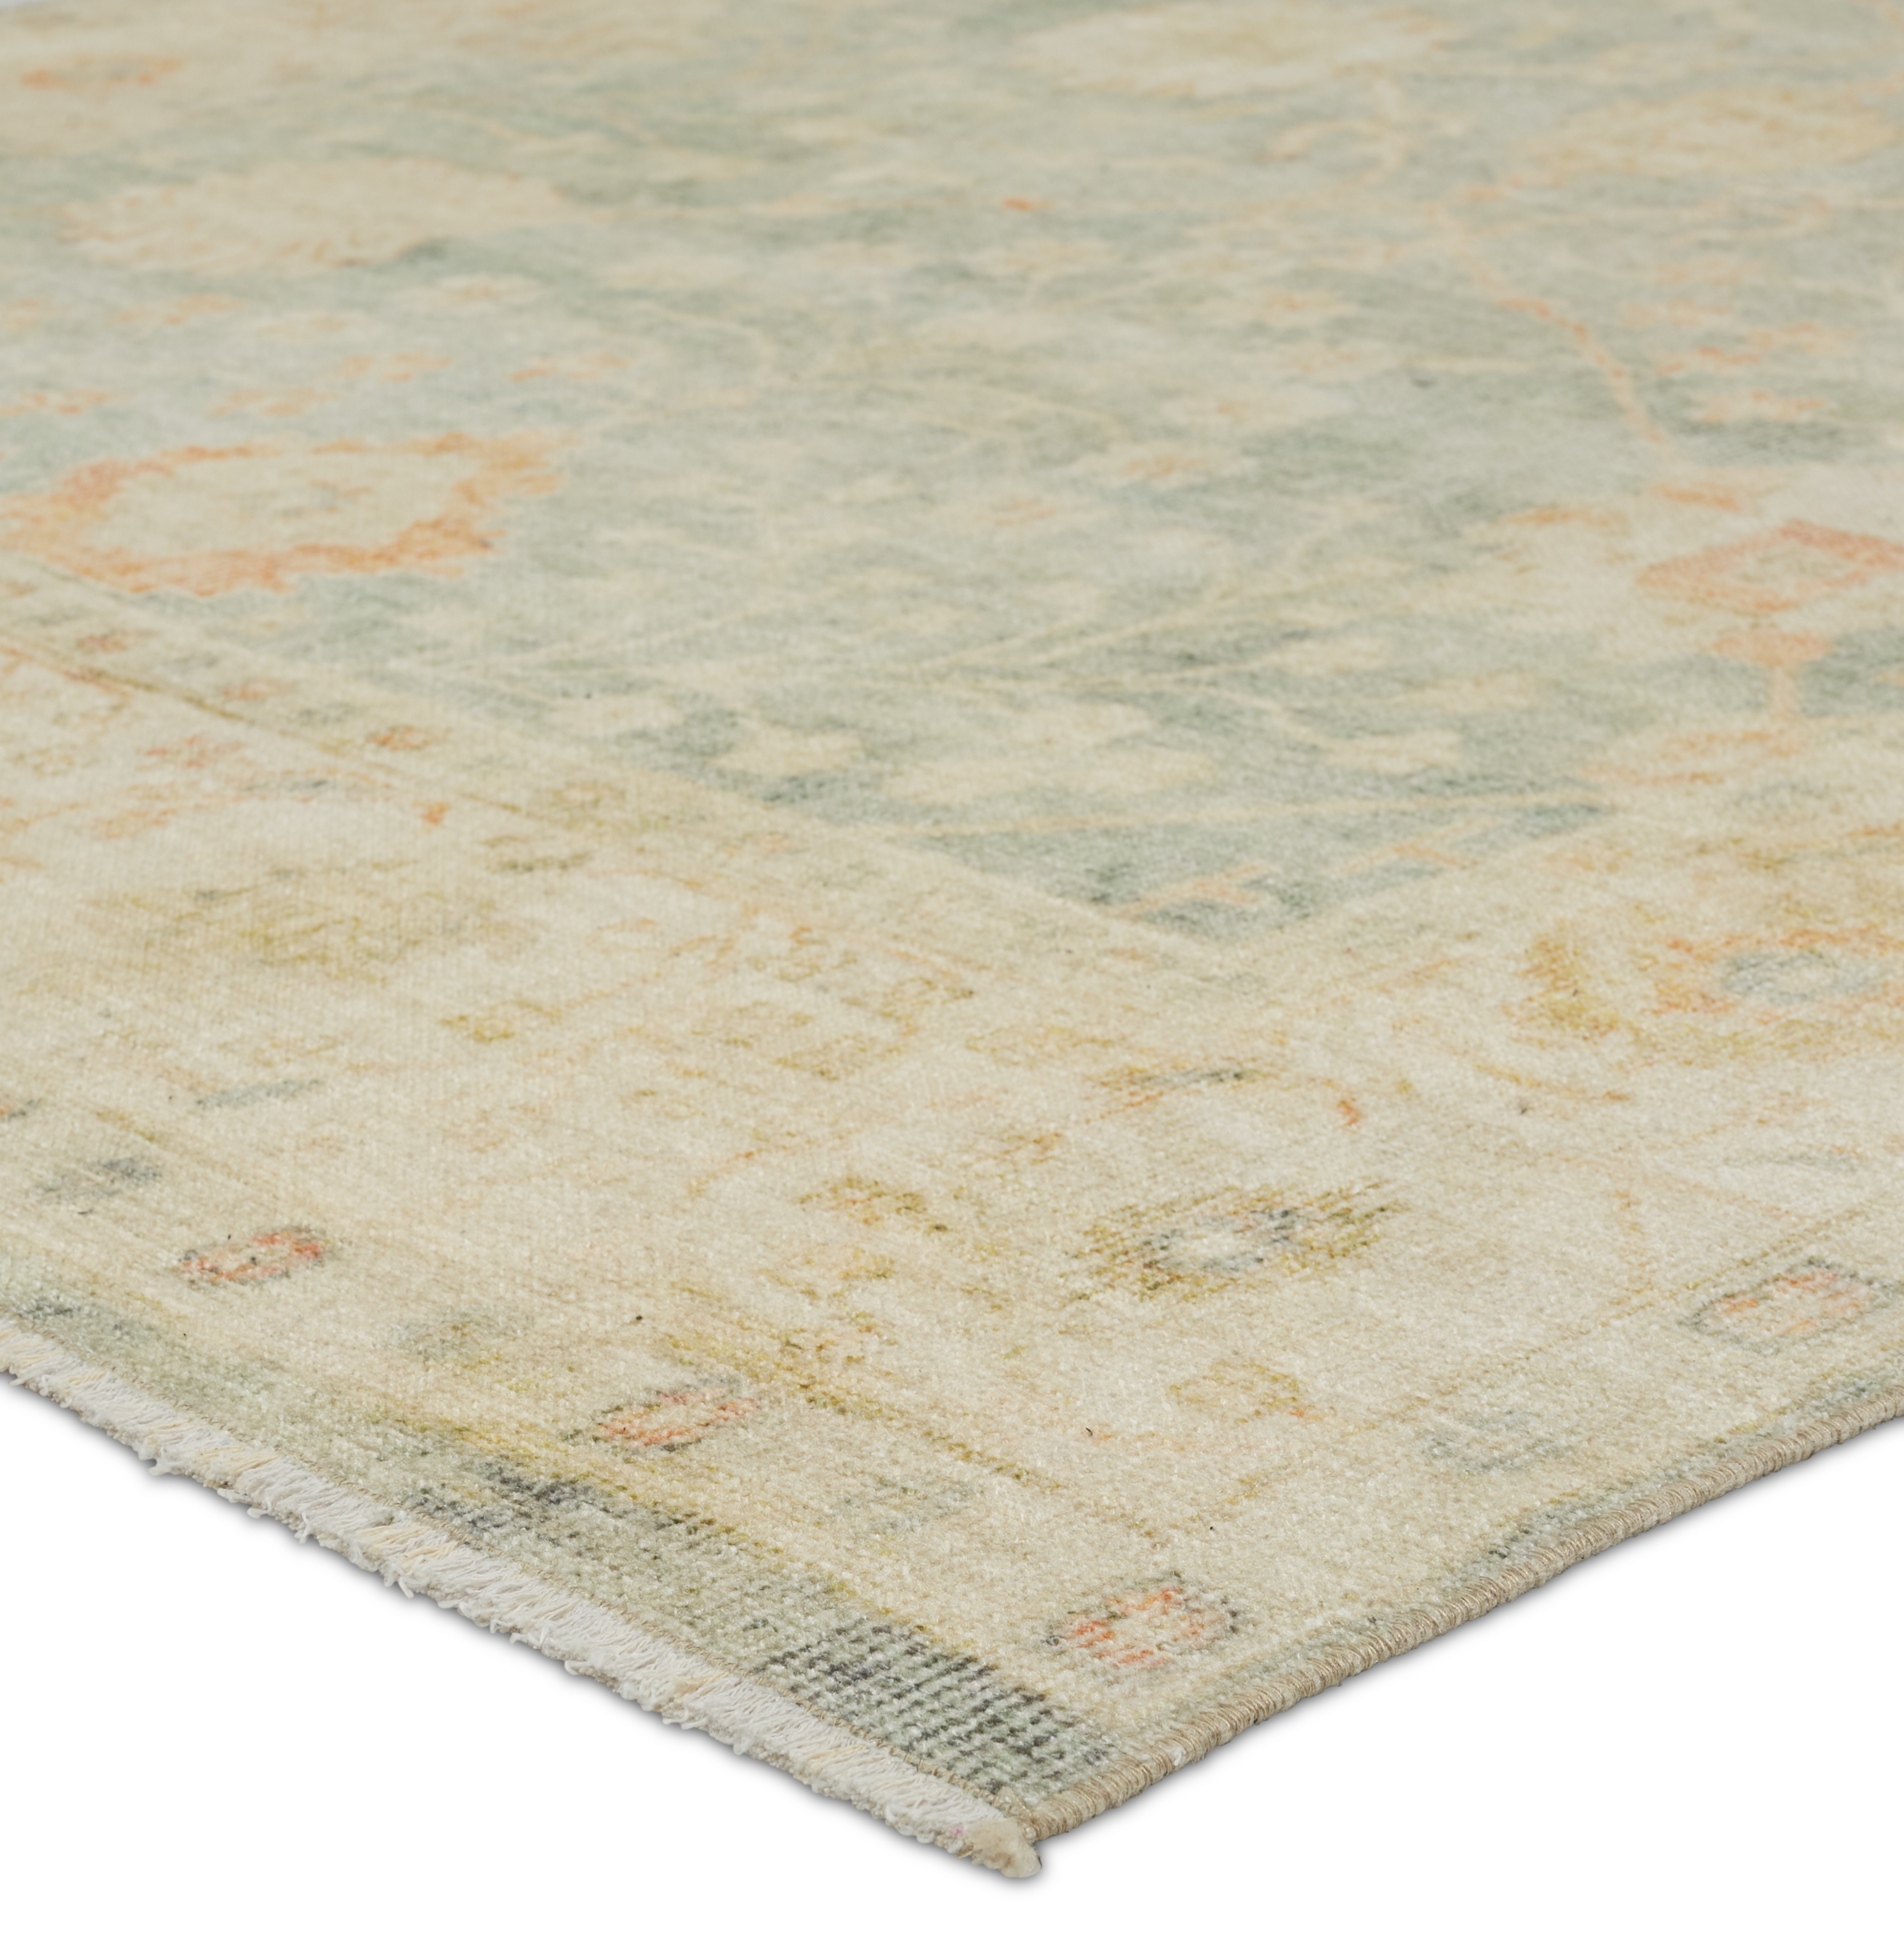 Lovato Floral Blue/ Green Area Rug (5'X8') - Image 1